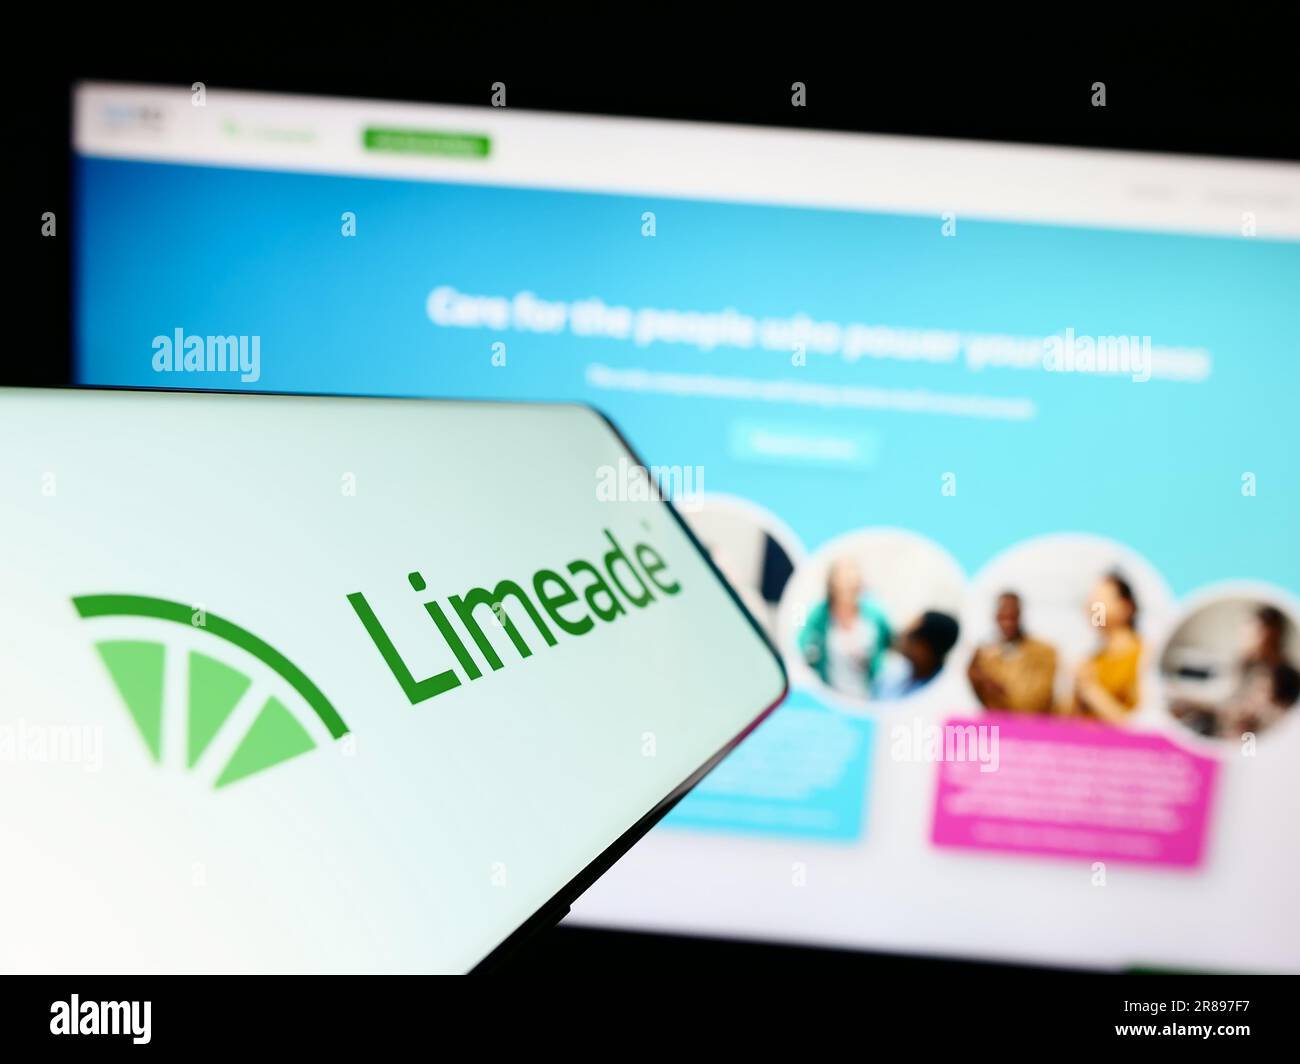 Cellphone with logo of American employee well-being company Limeade Inc. on screen in front of web page. Focus on center of phone display. Stock Photo